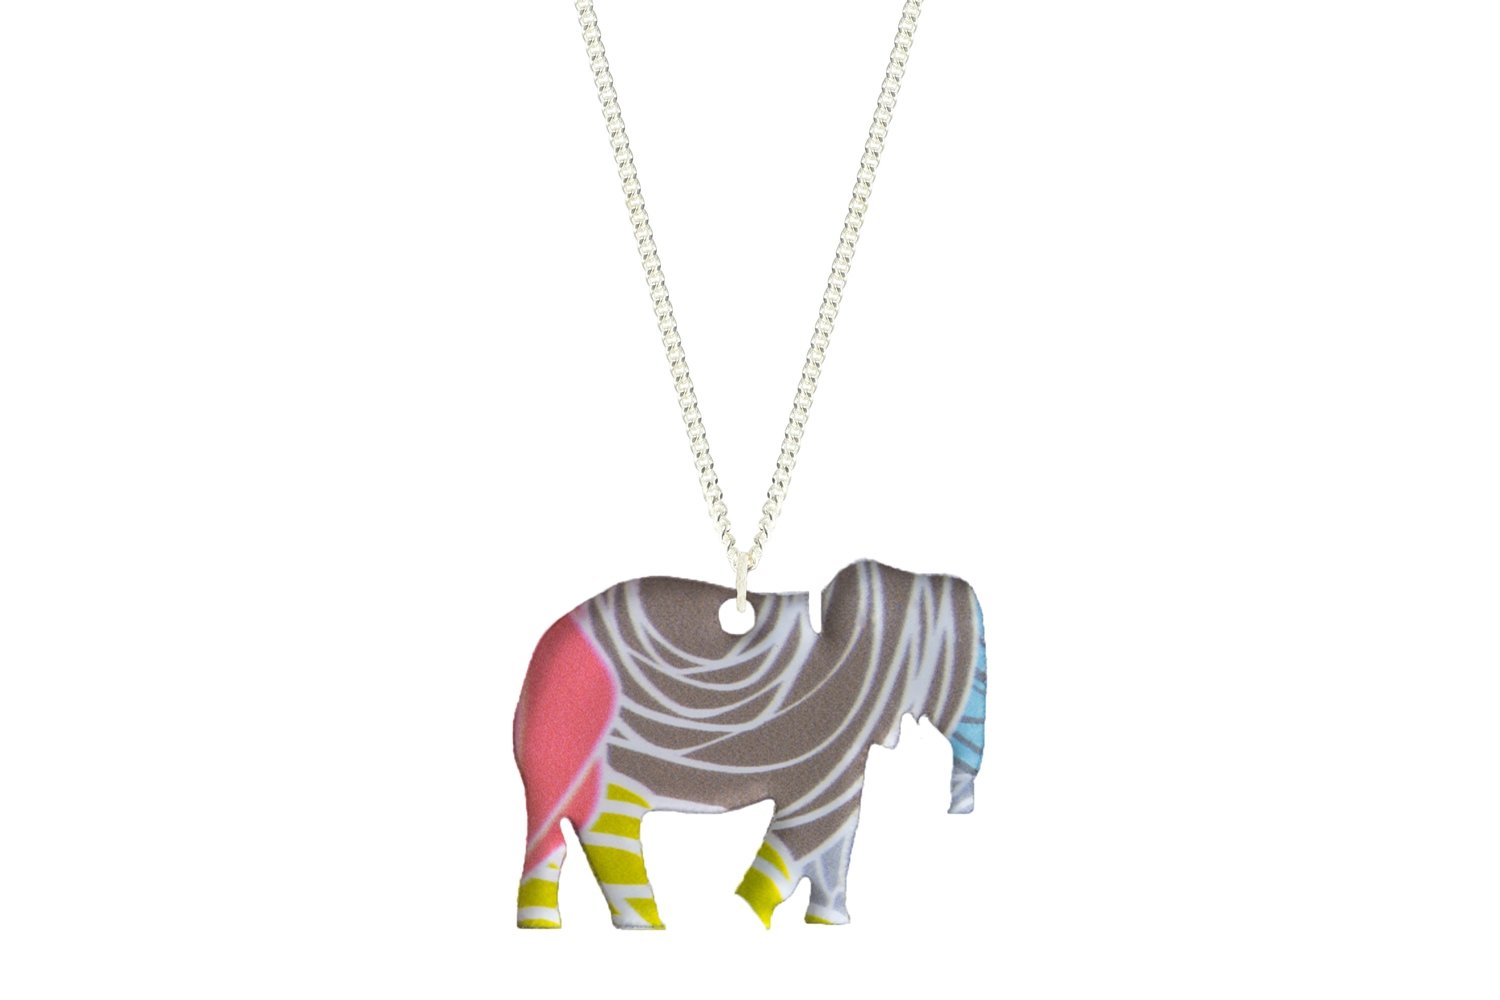 Elephant Pendant Sculpted Style on Chain Necklace